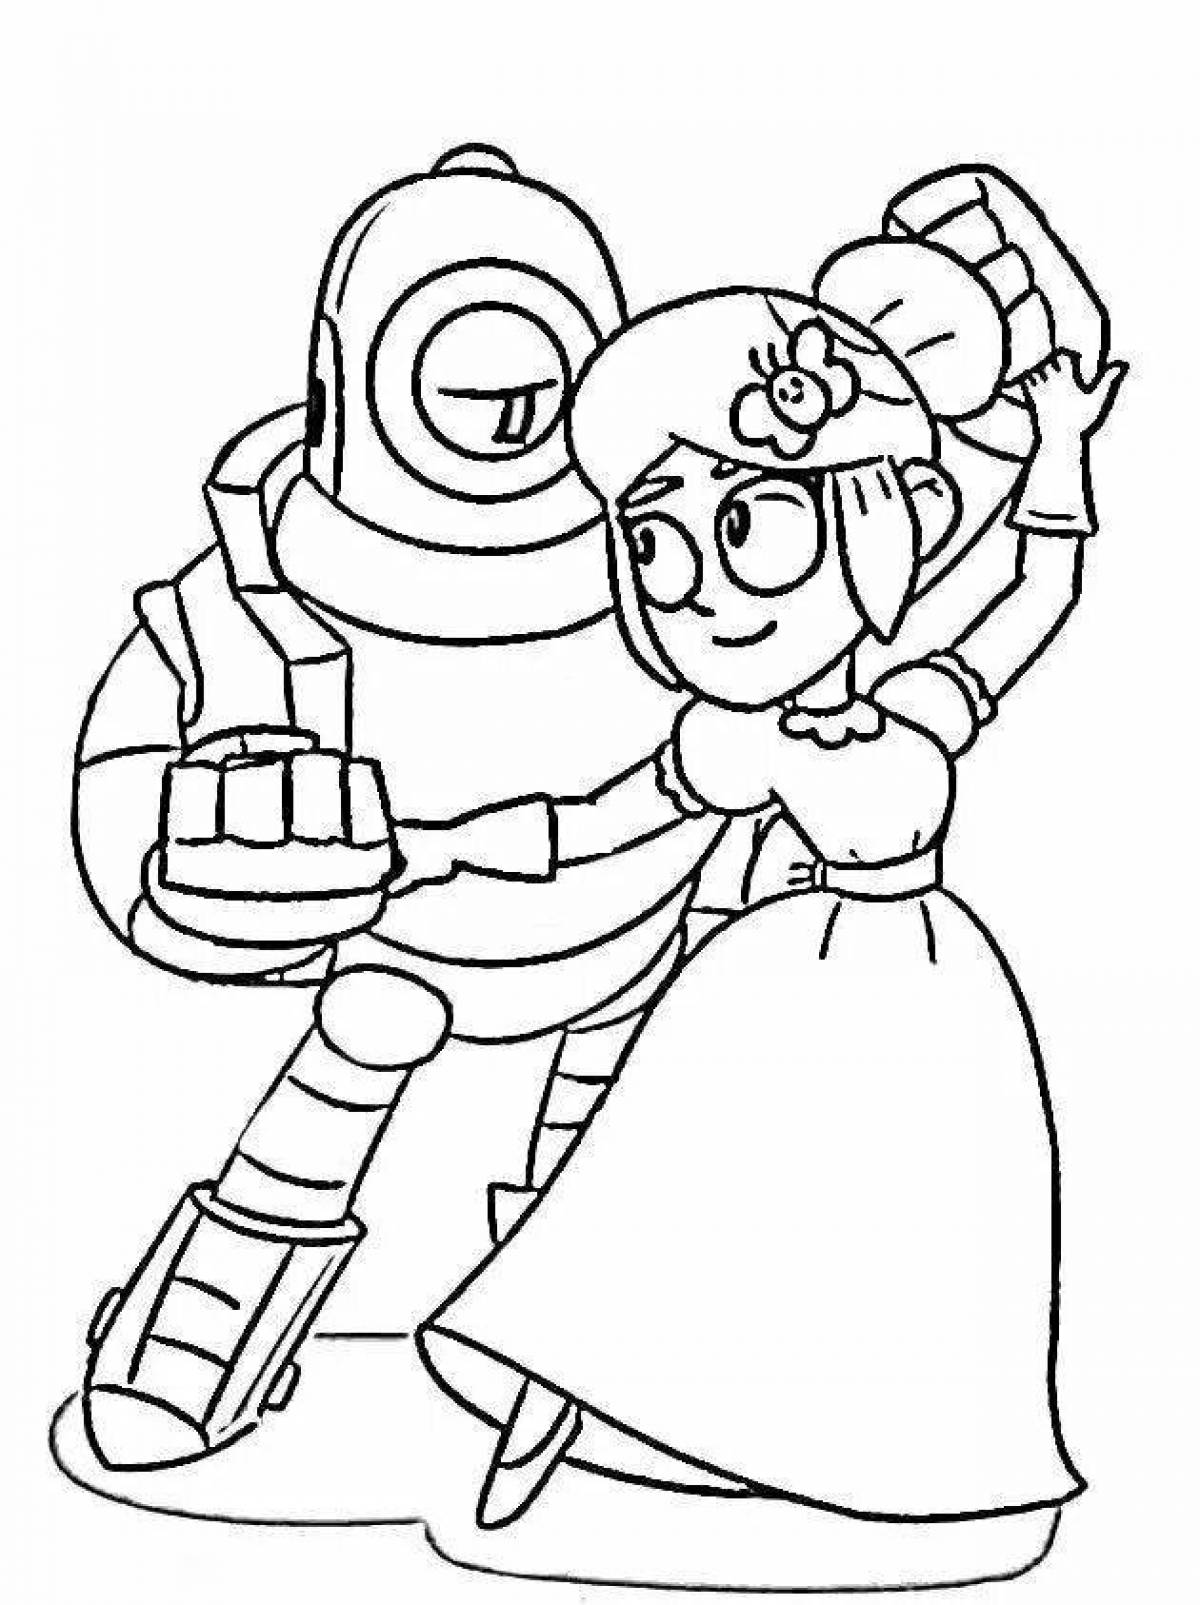 Sparkling bagpipe coloring page